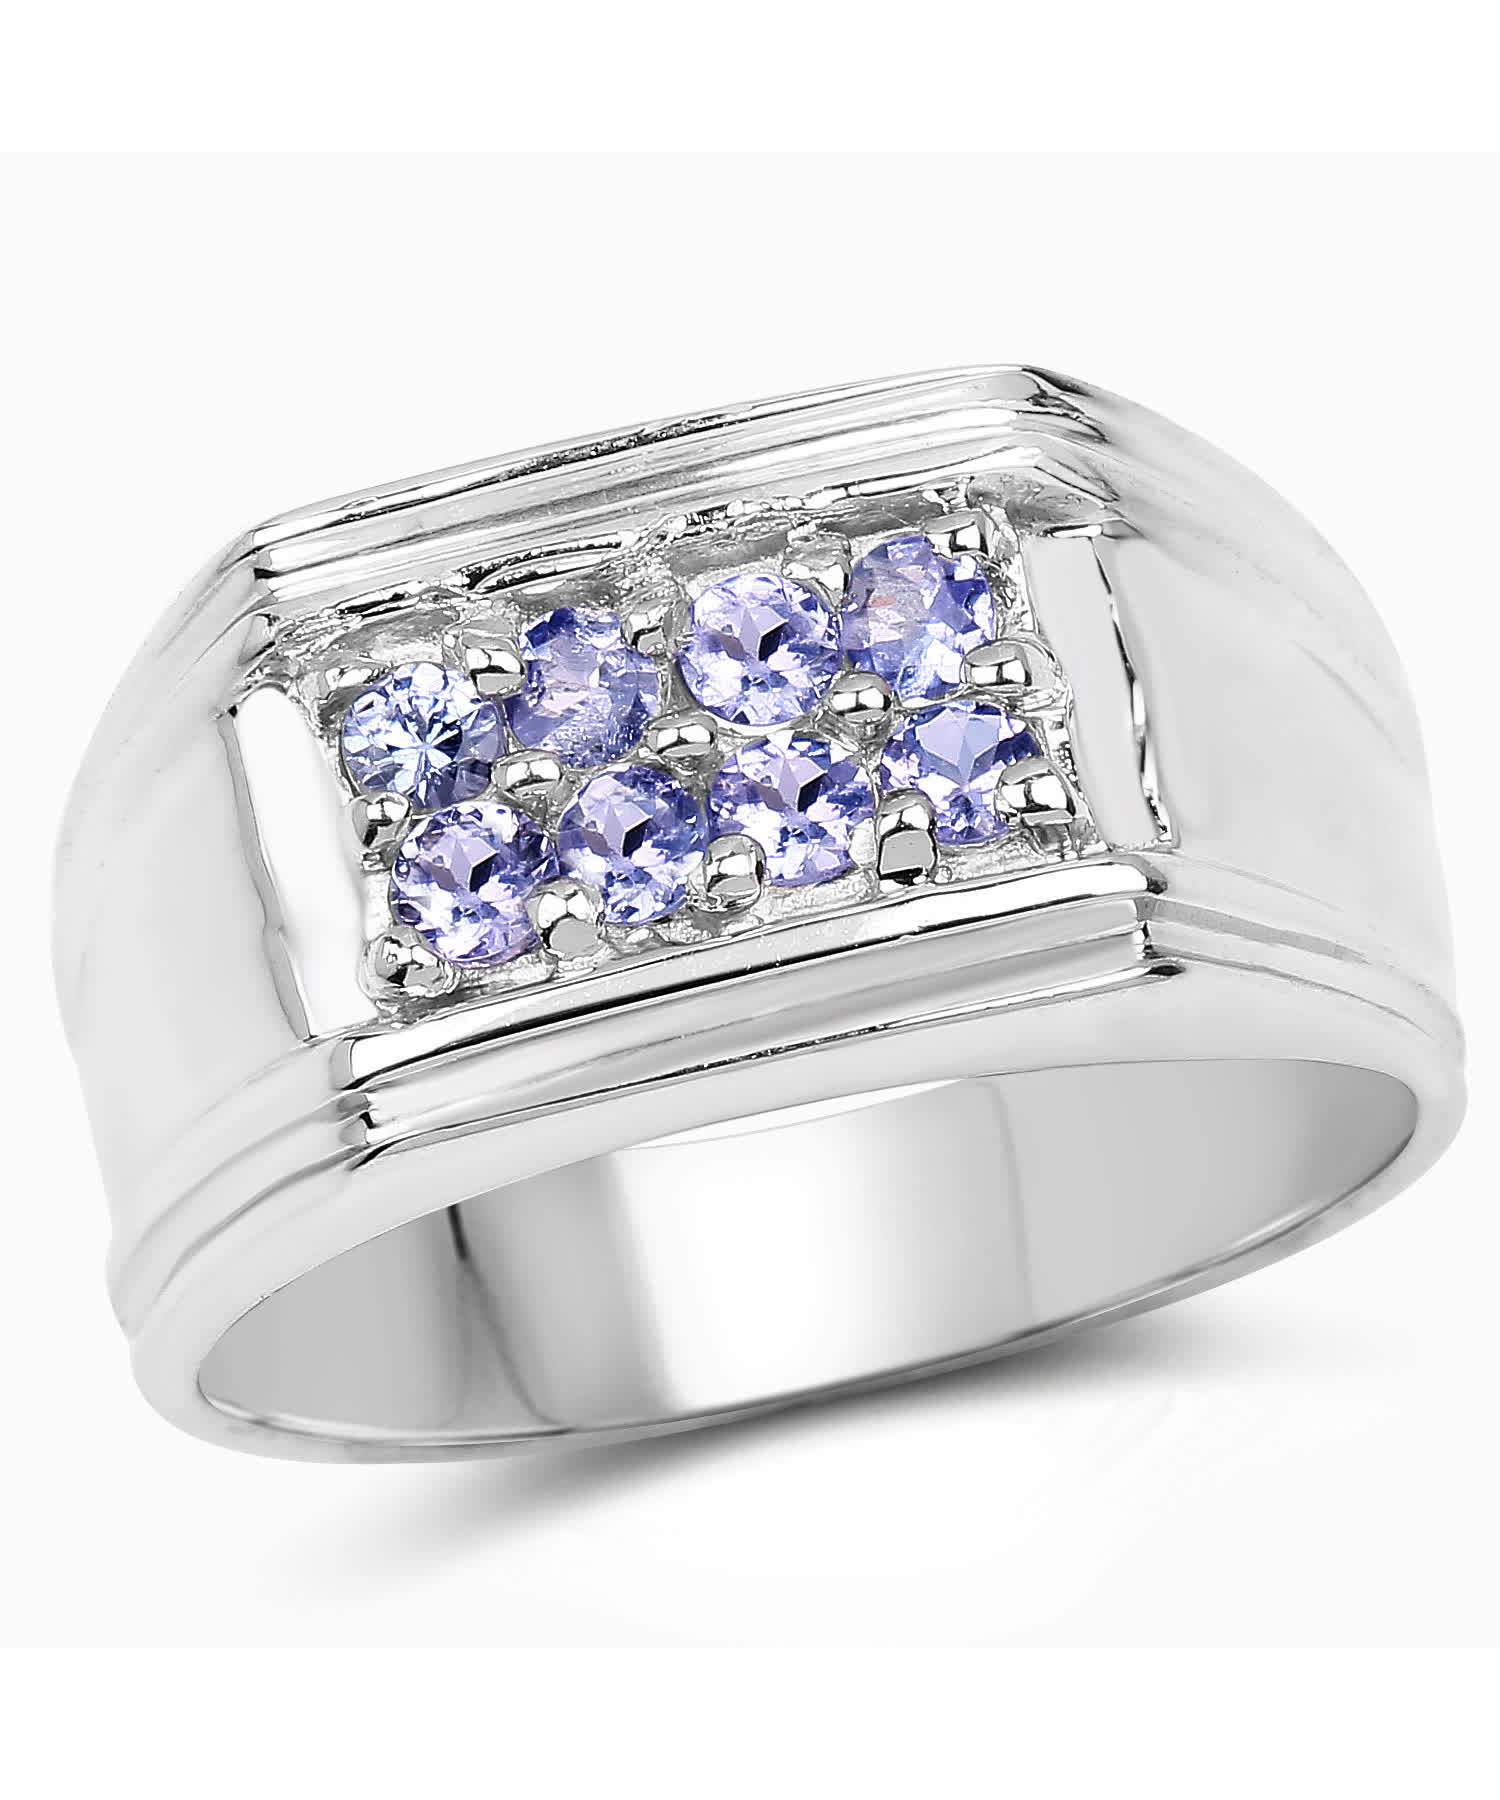 0.56ctw Natural Tanzanite Rhodium Plated 925 Sterling Silver Ring View 1